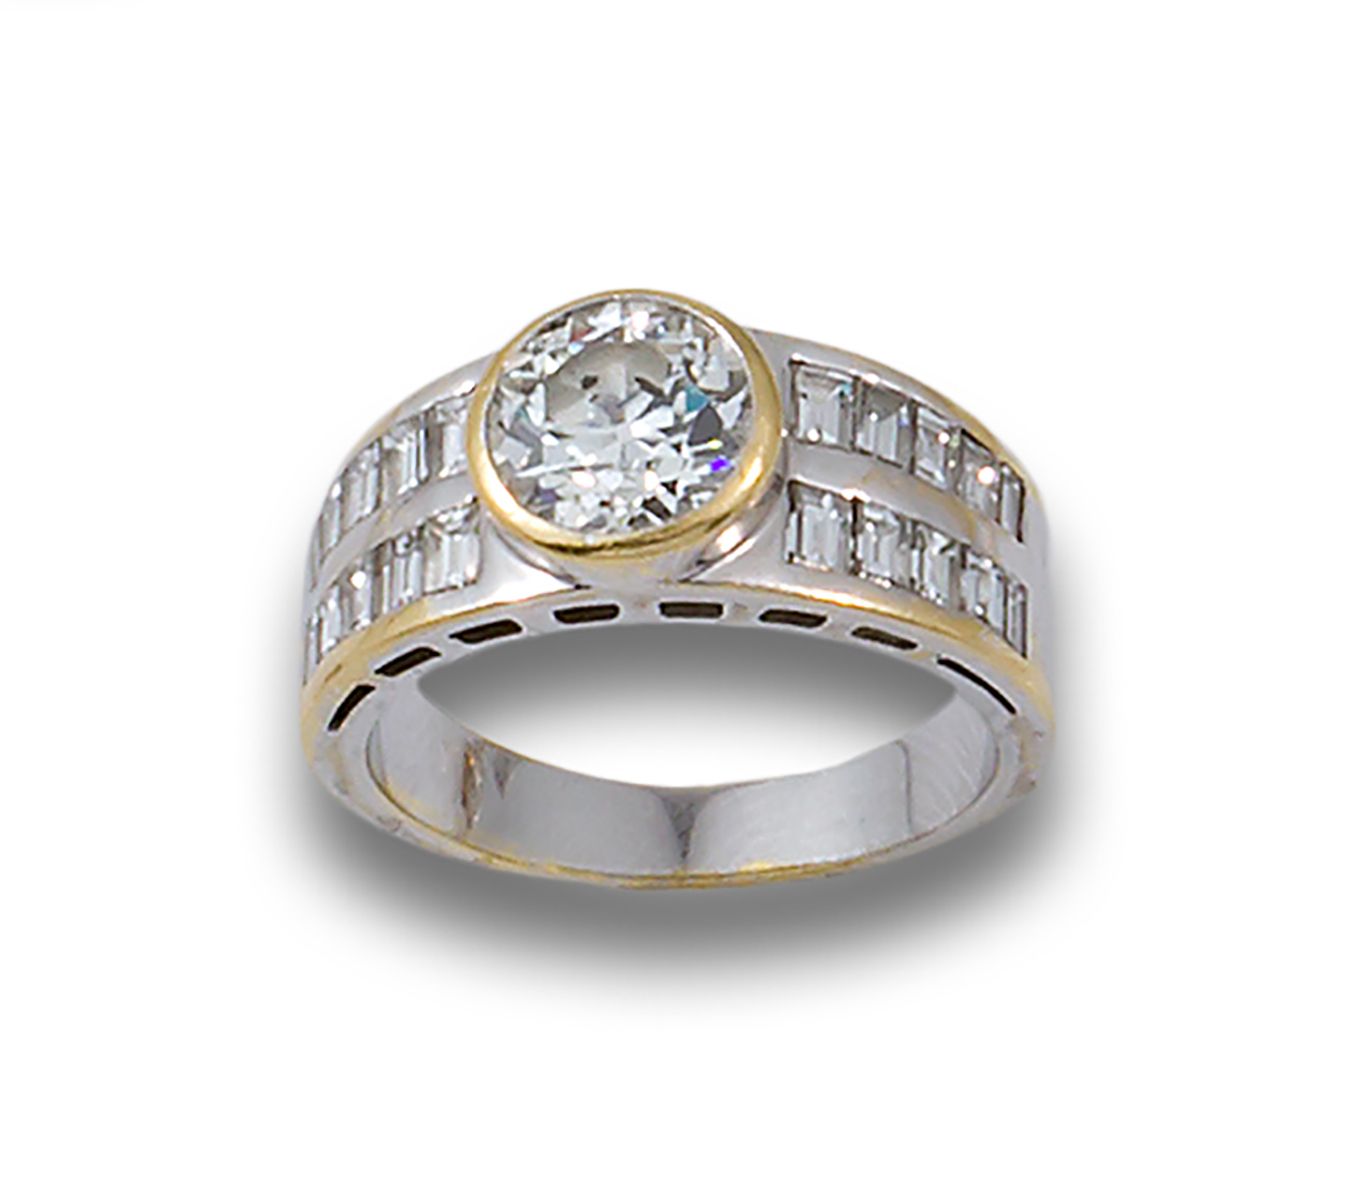 SOLITAIRE RING CENTRE 1,75 CT. APPROX. WHITE AND YELLOW GOLD 18K黄金和白金单颗钻石戒指，包括一颗&hellip;